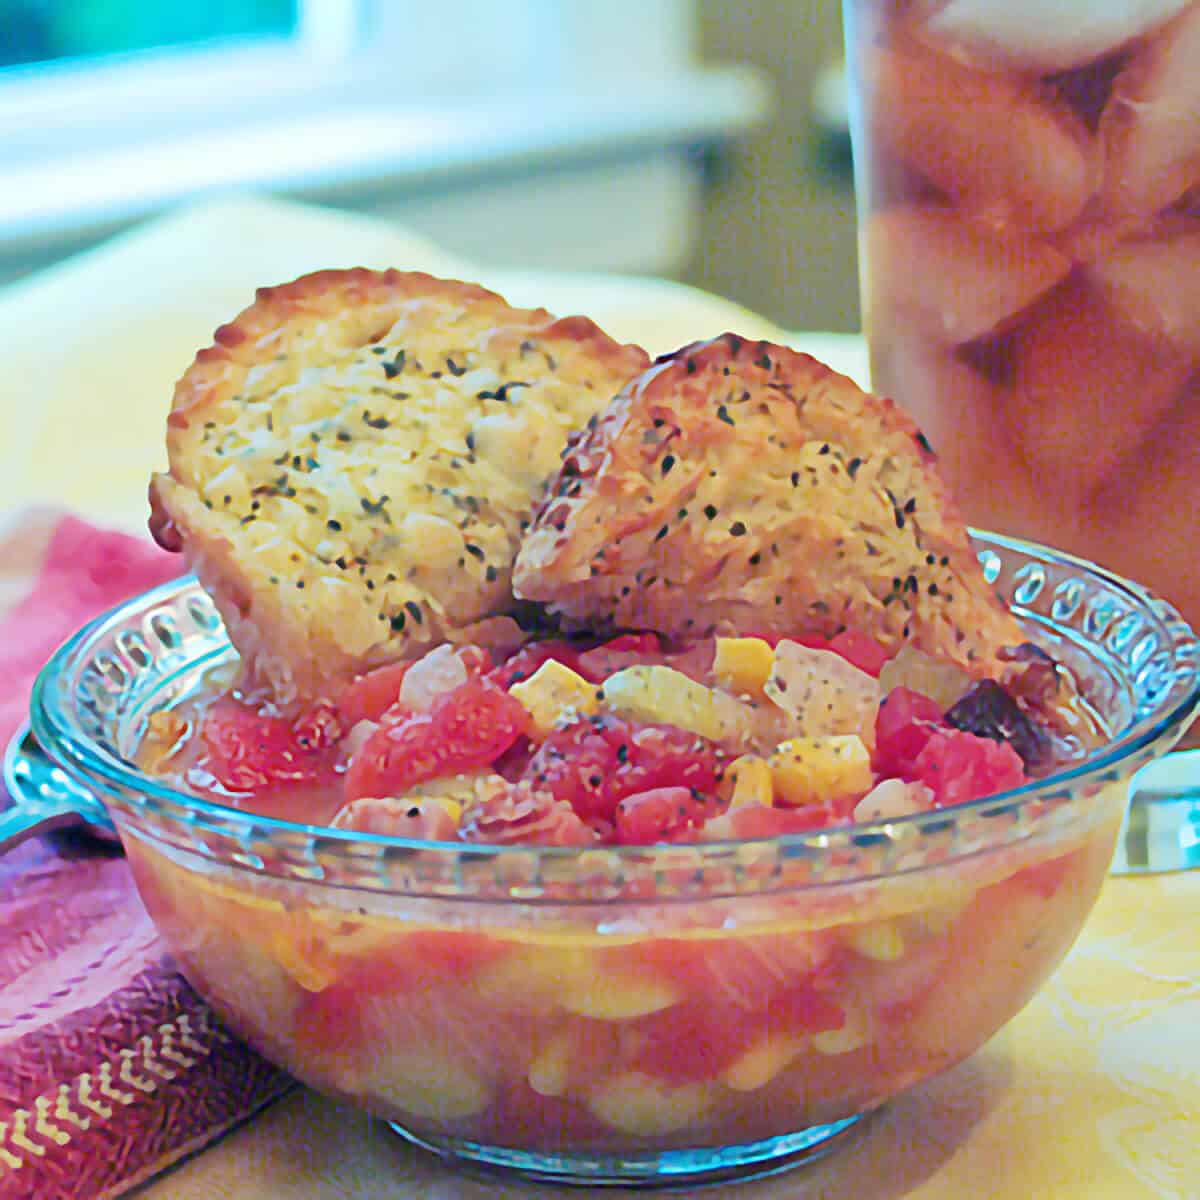 A serving of ham bone soup in a clear bowl with garlic bread on the side.